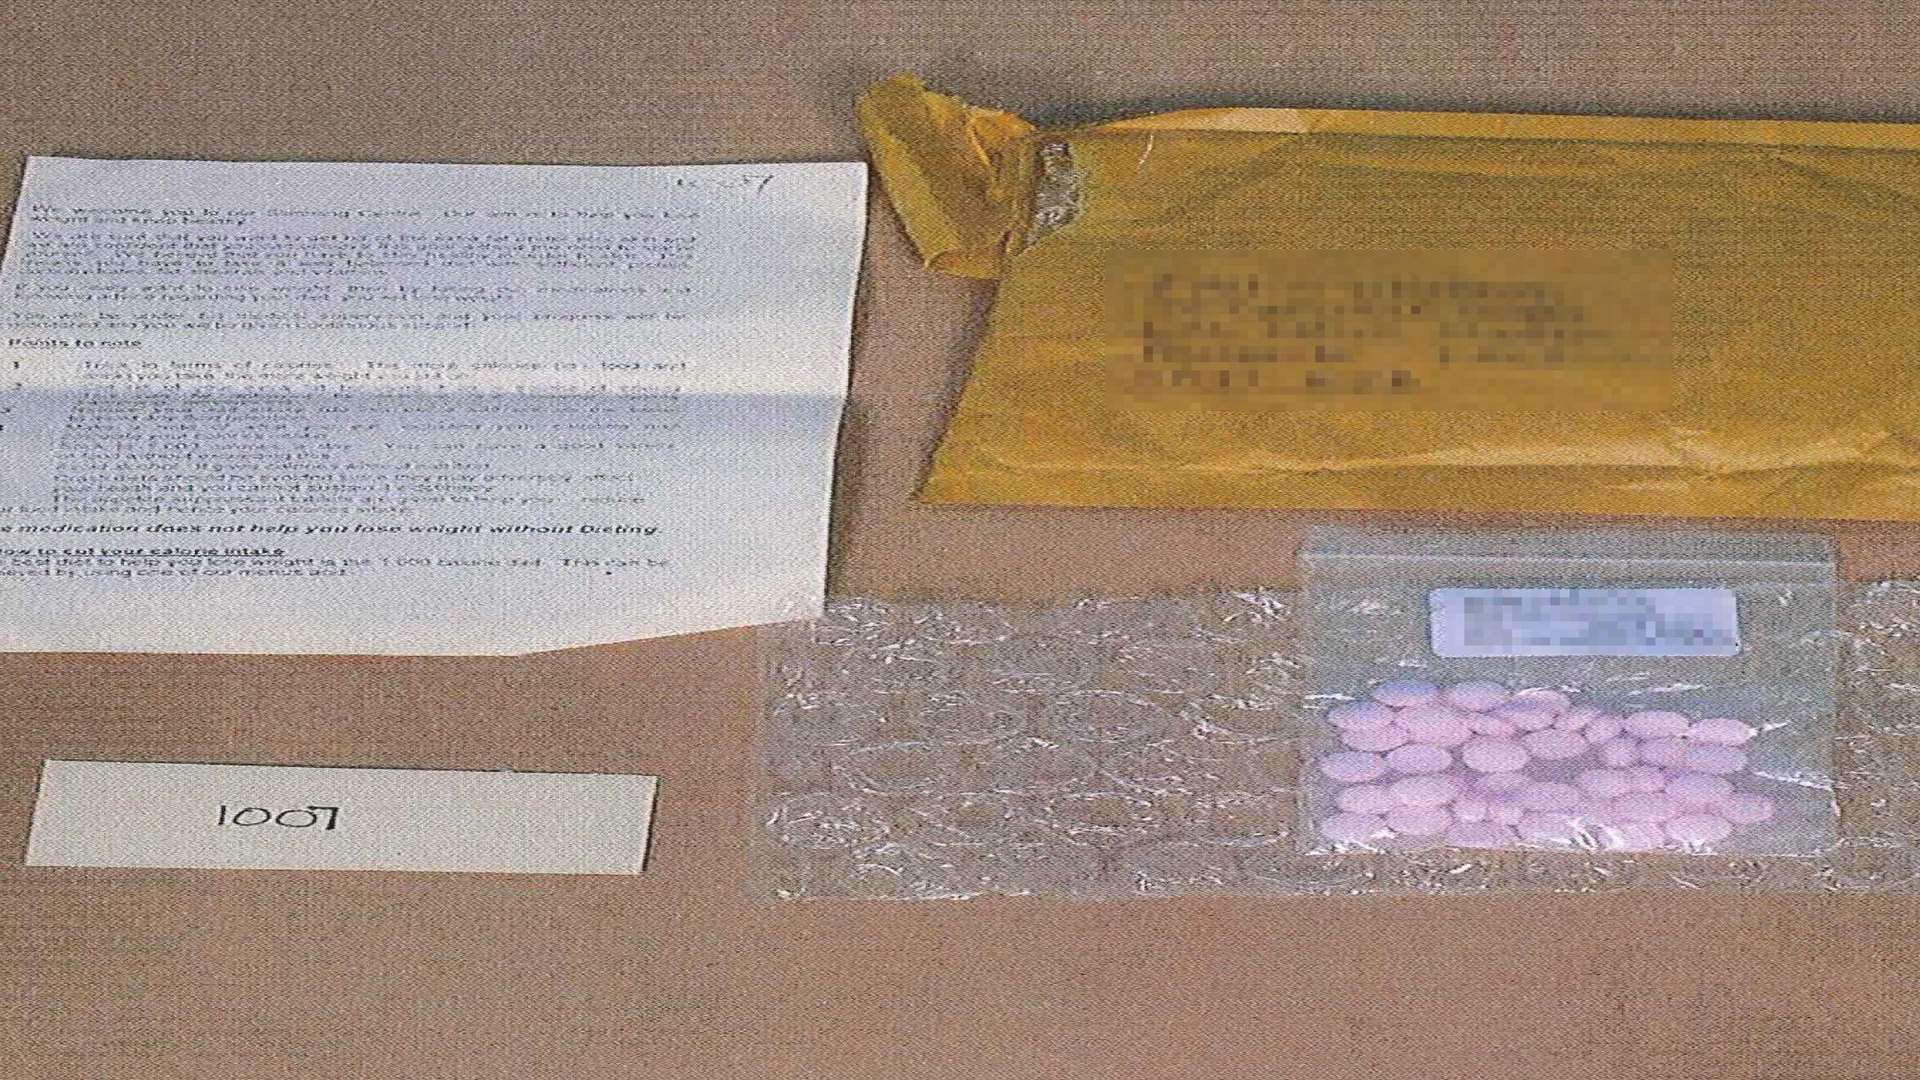 Some of the pills illegally sent to customers by the women